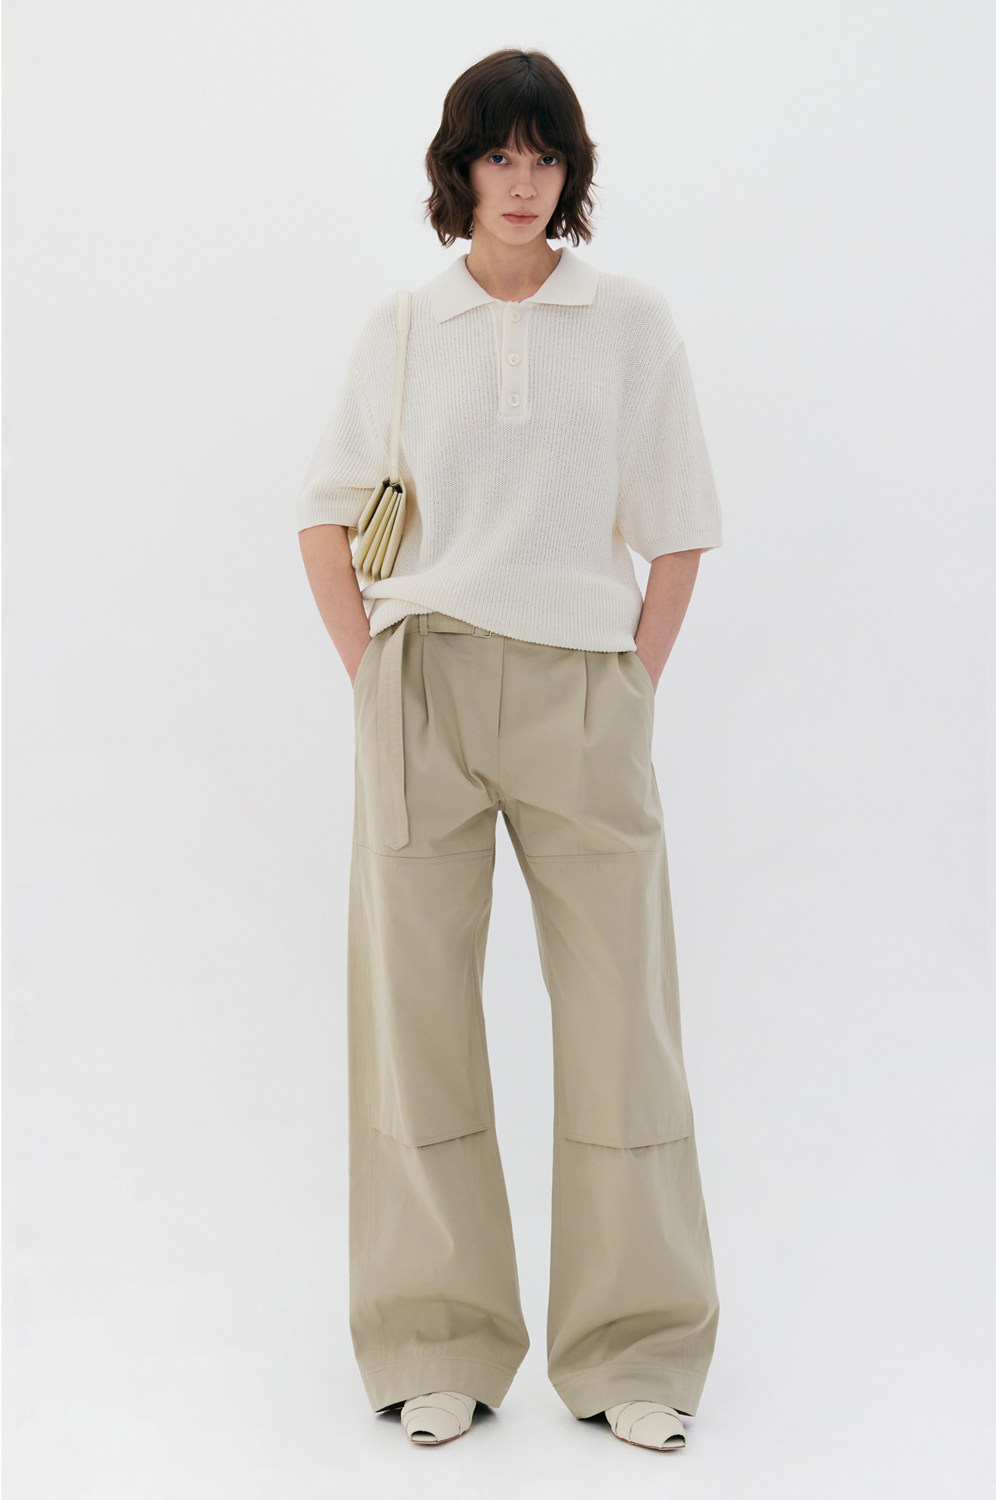 SS23_LOOK_17